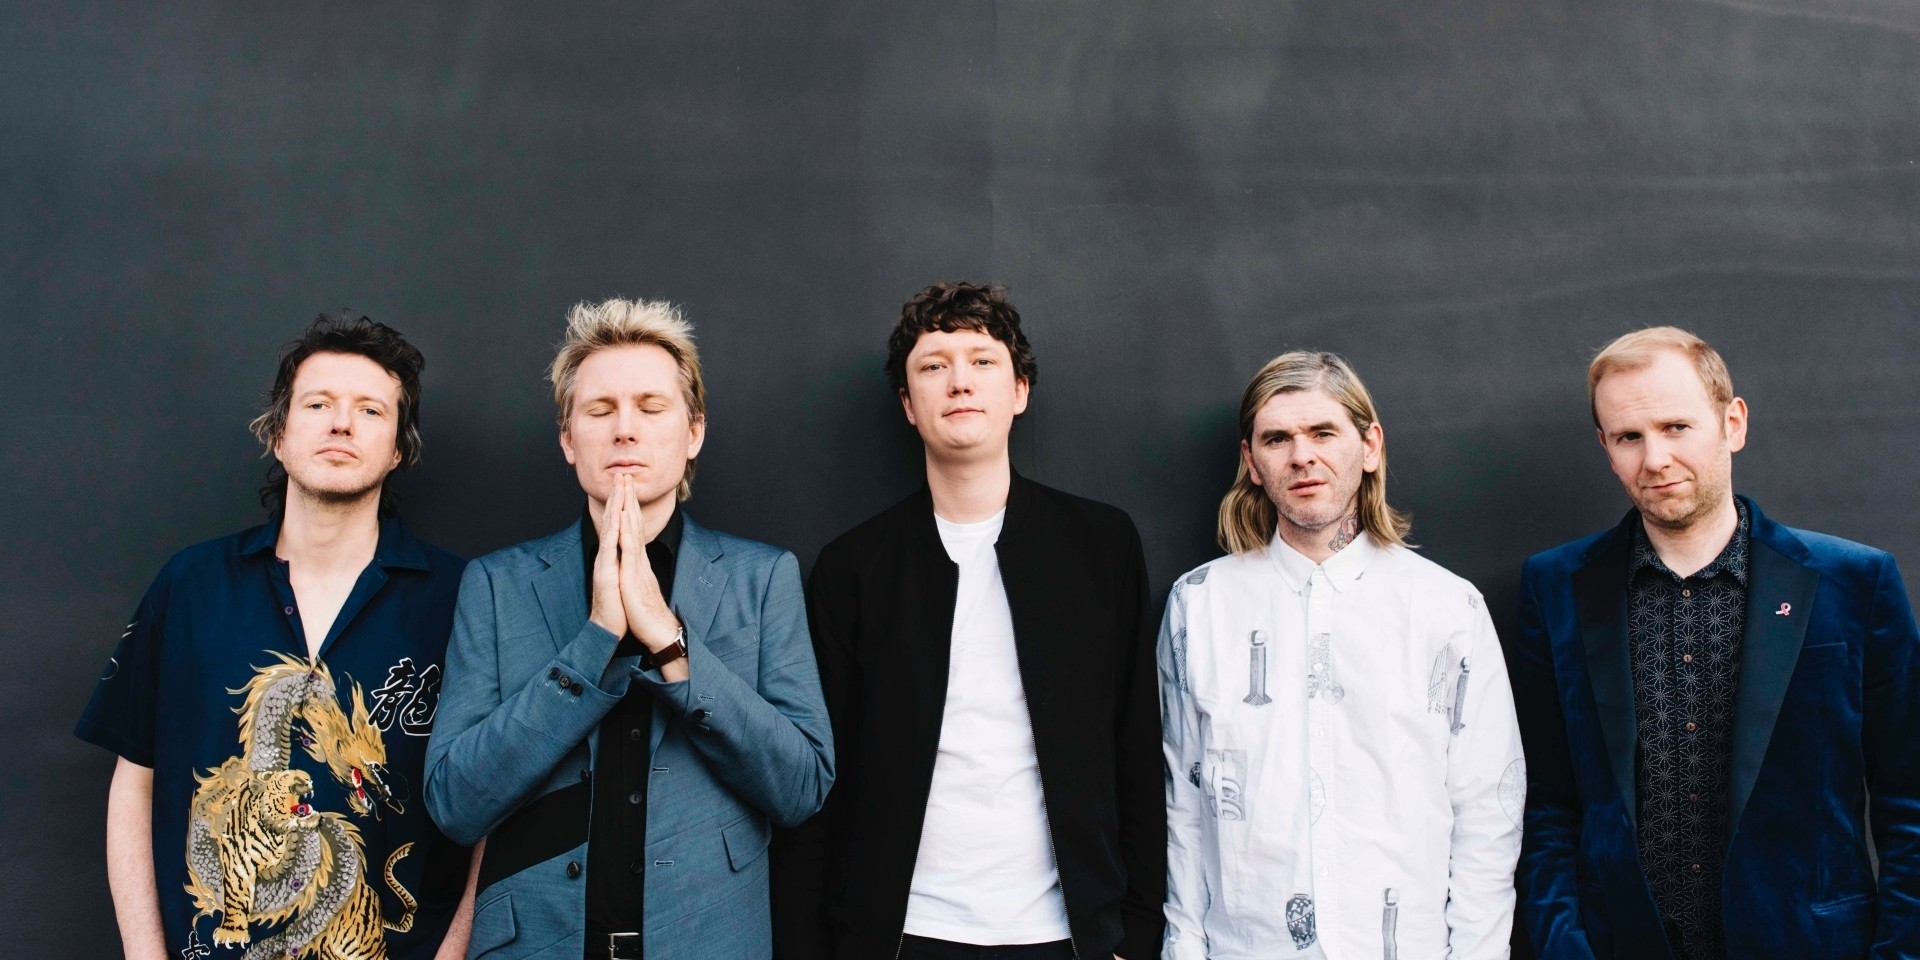 "We pushed it further this time": Franz Ferdinand's Bob Hardy reflects on the band's new album, Always Ascending